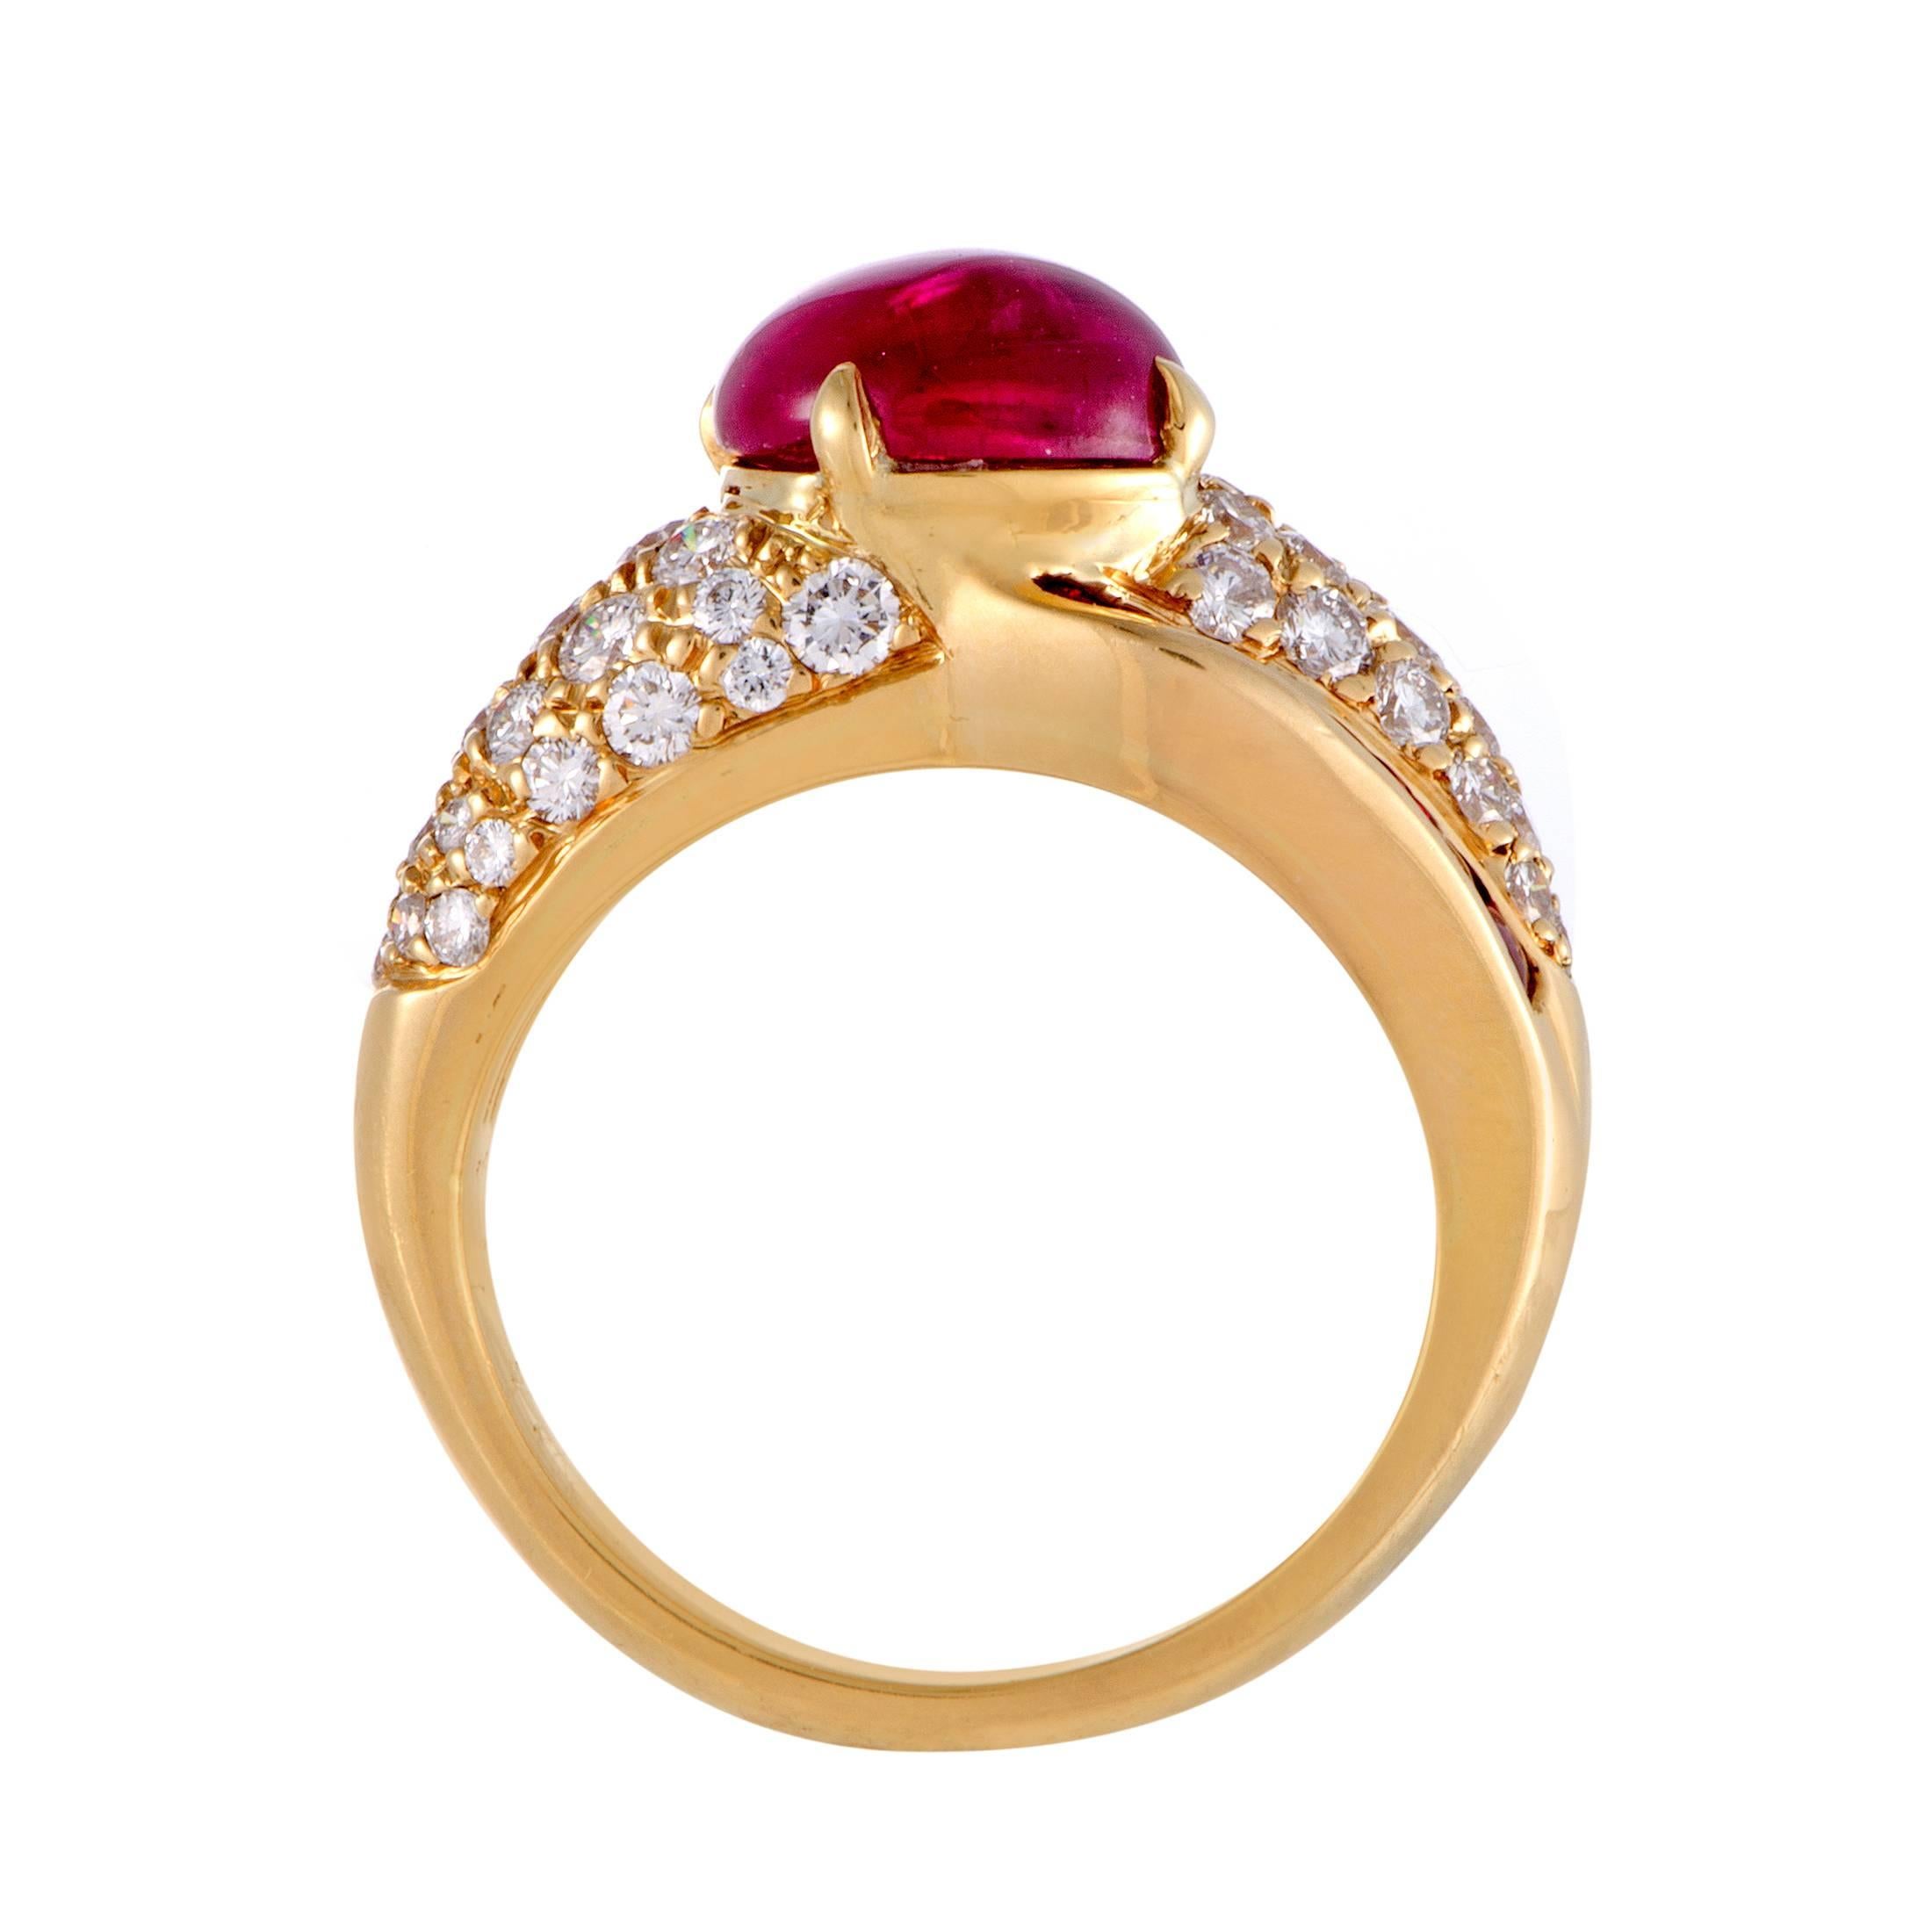 Producing a sight of spellbinding luxury and femininity, the fabulous 18K yellow gold is embellished with a fascinating blend of approximately 1.10 carats of diamonds and approximately 0.70 carats of rubies while the fantastic cabochon ruby weighing